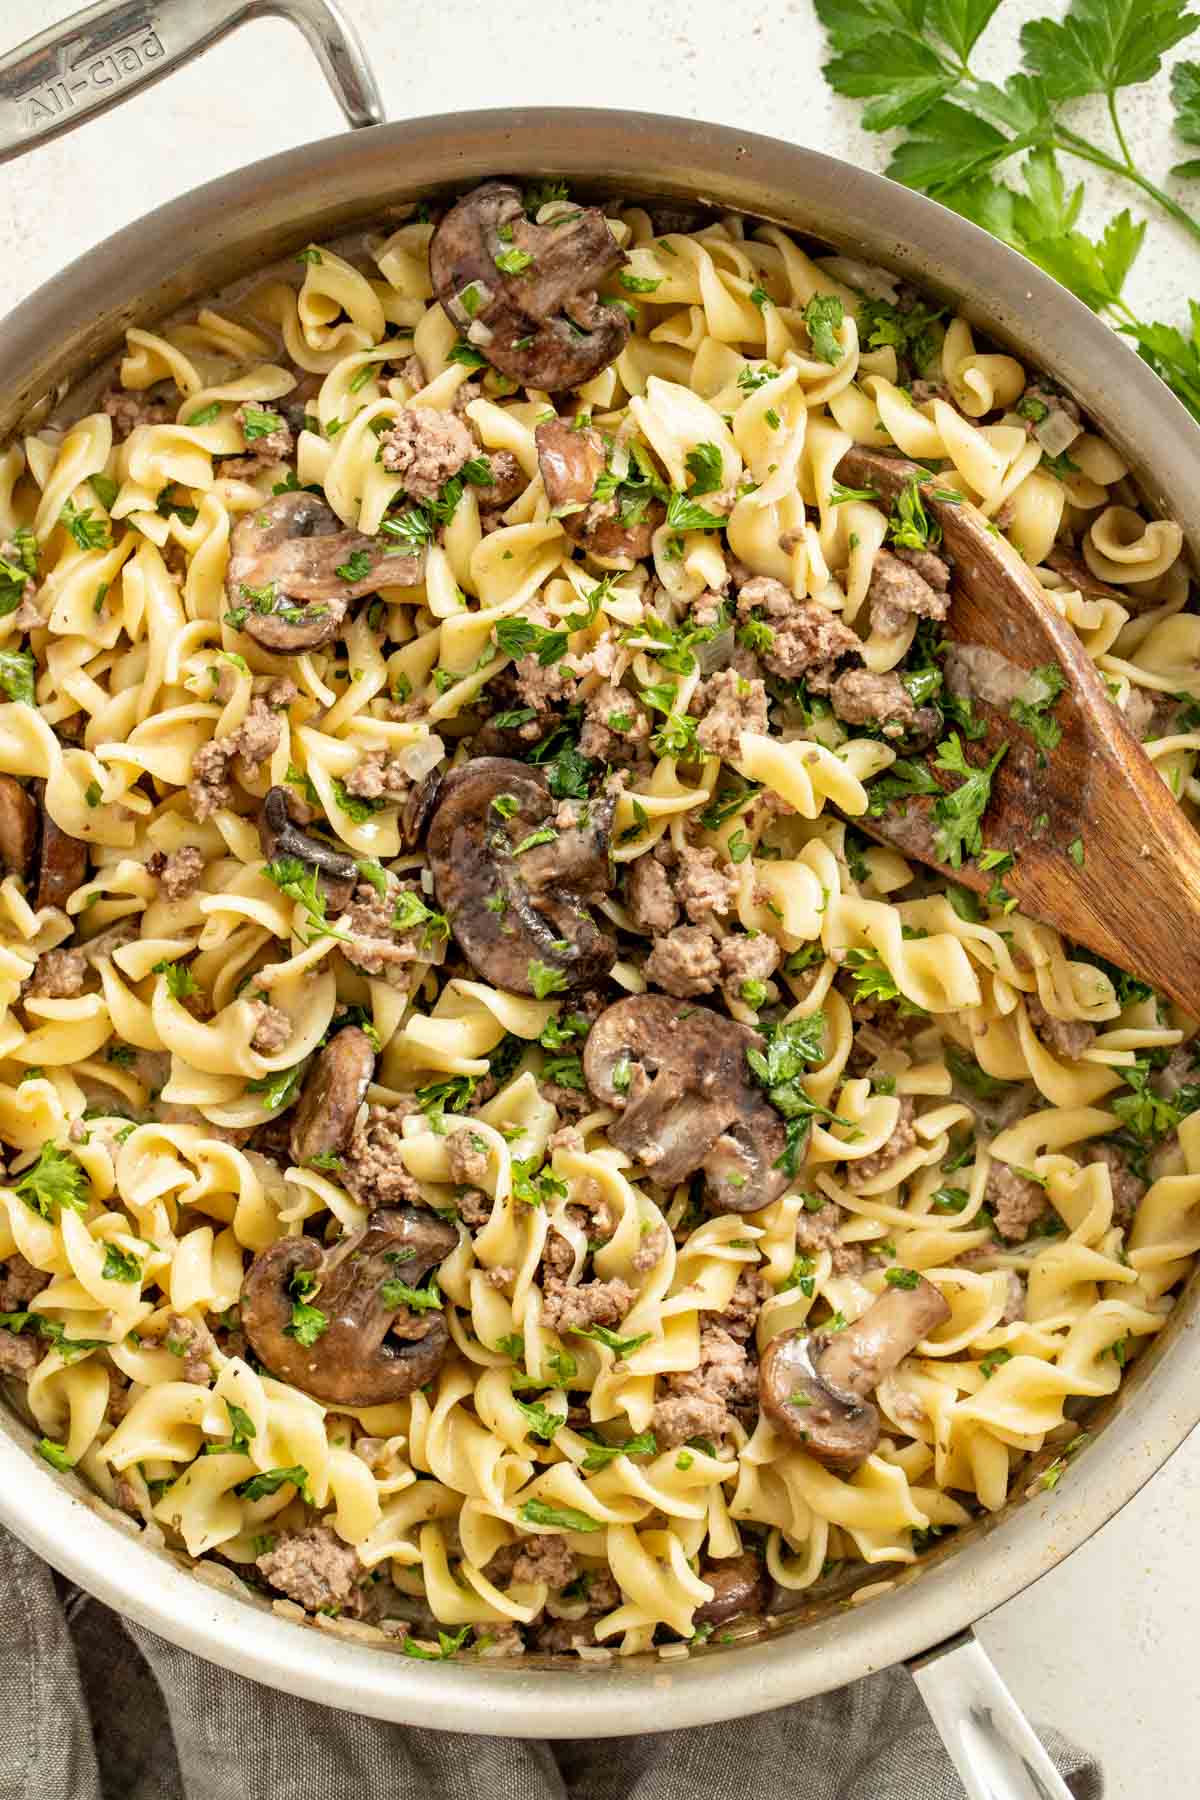 Beef stroganoff noodles in a stainless steel all clad pan topped with parsley.